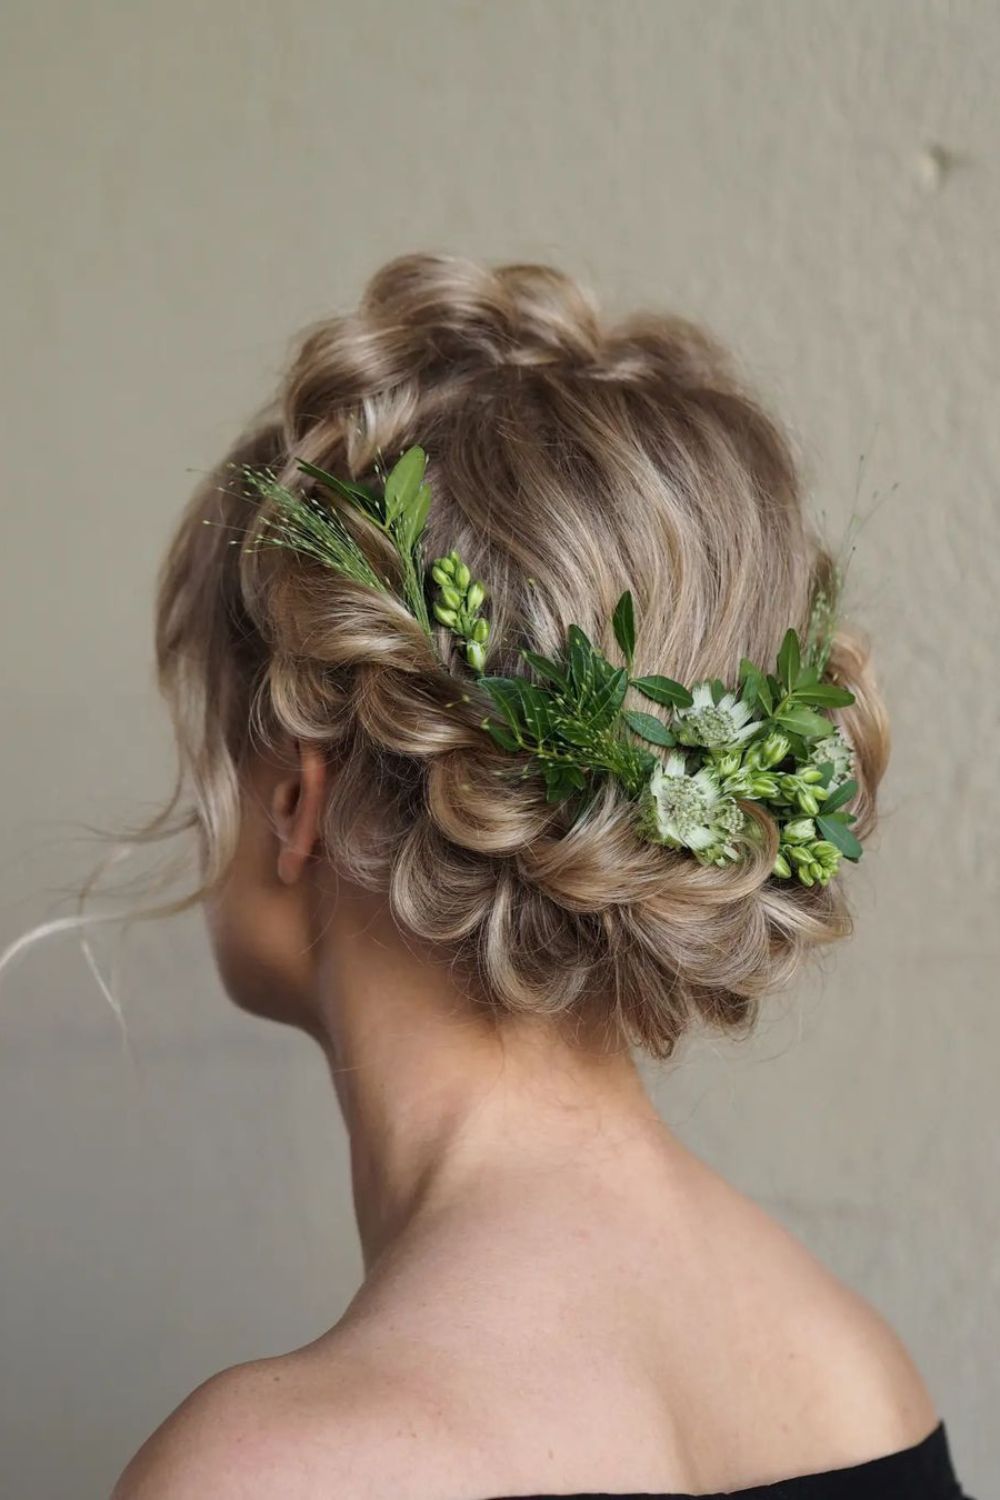 A woman with a blonde crown braid with flower accessories.